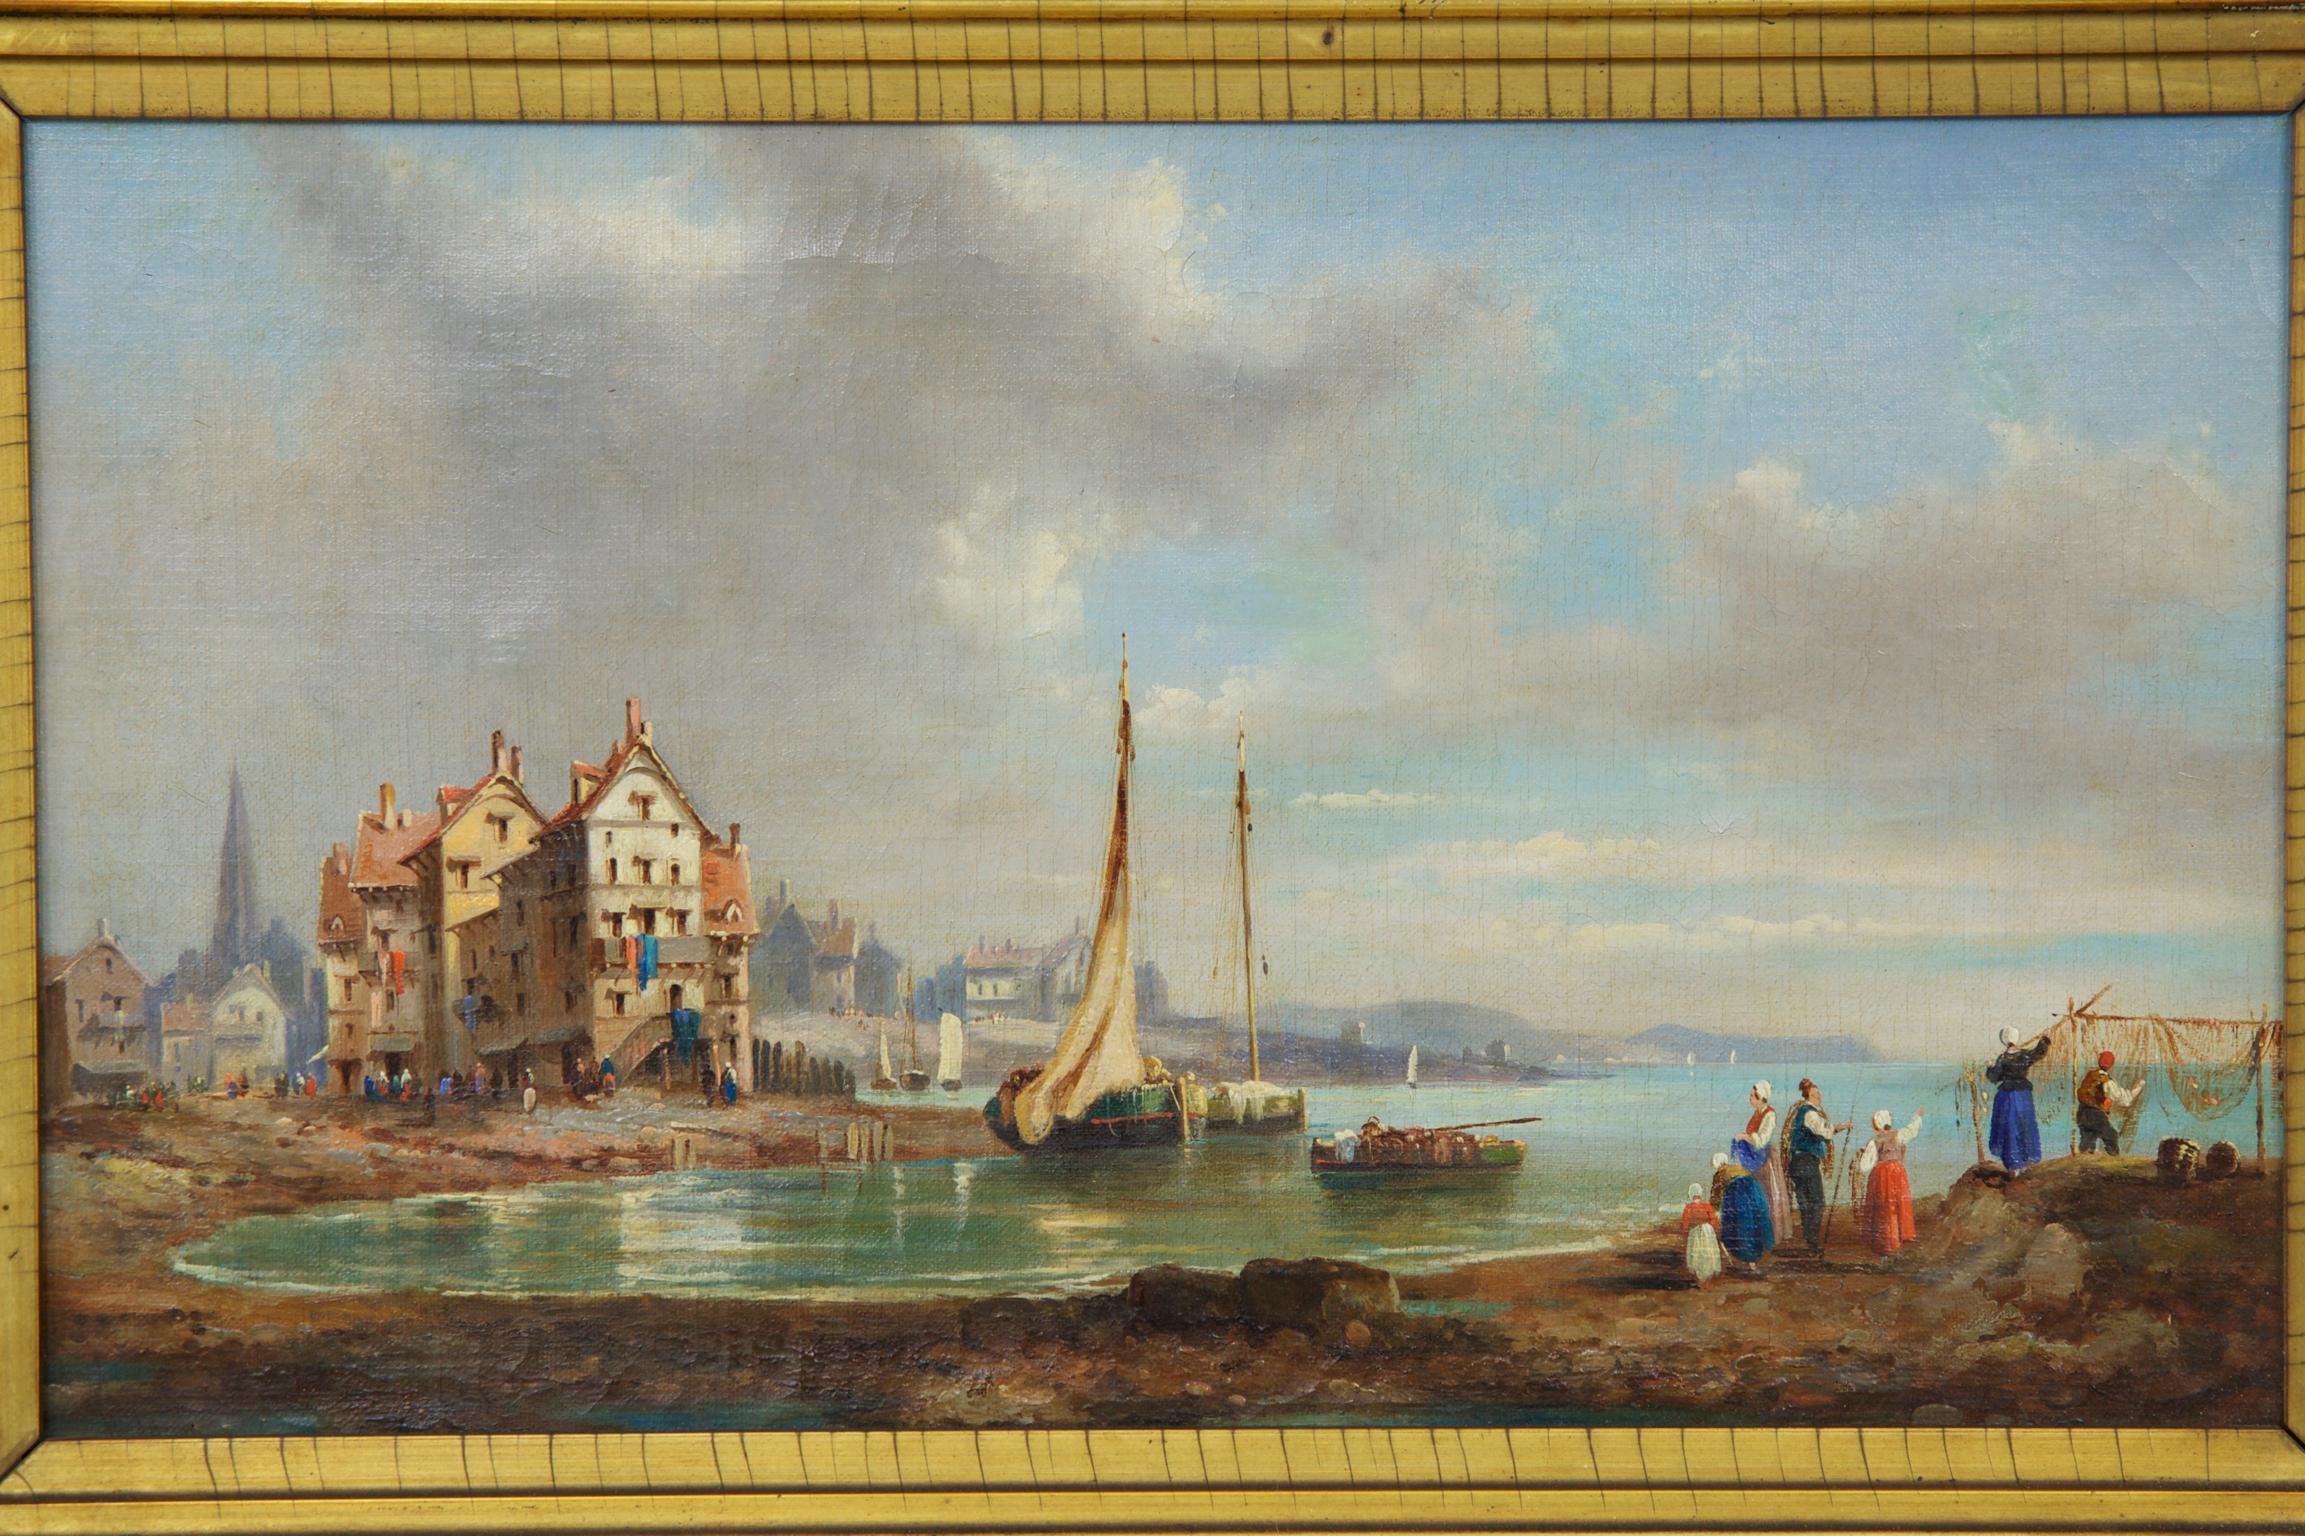 Continental landscape painting of a seaside village
Signed illegibly lower left, executed in oil on canvas, circa mid-late 19th century

This is an attractive mid-late 19th century oil painting on canvas of fishermen and women hanging out their